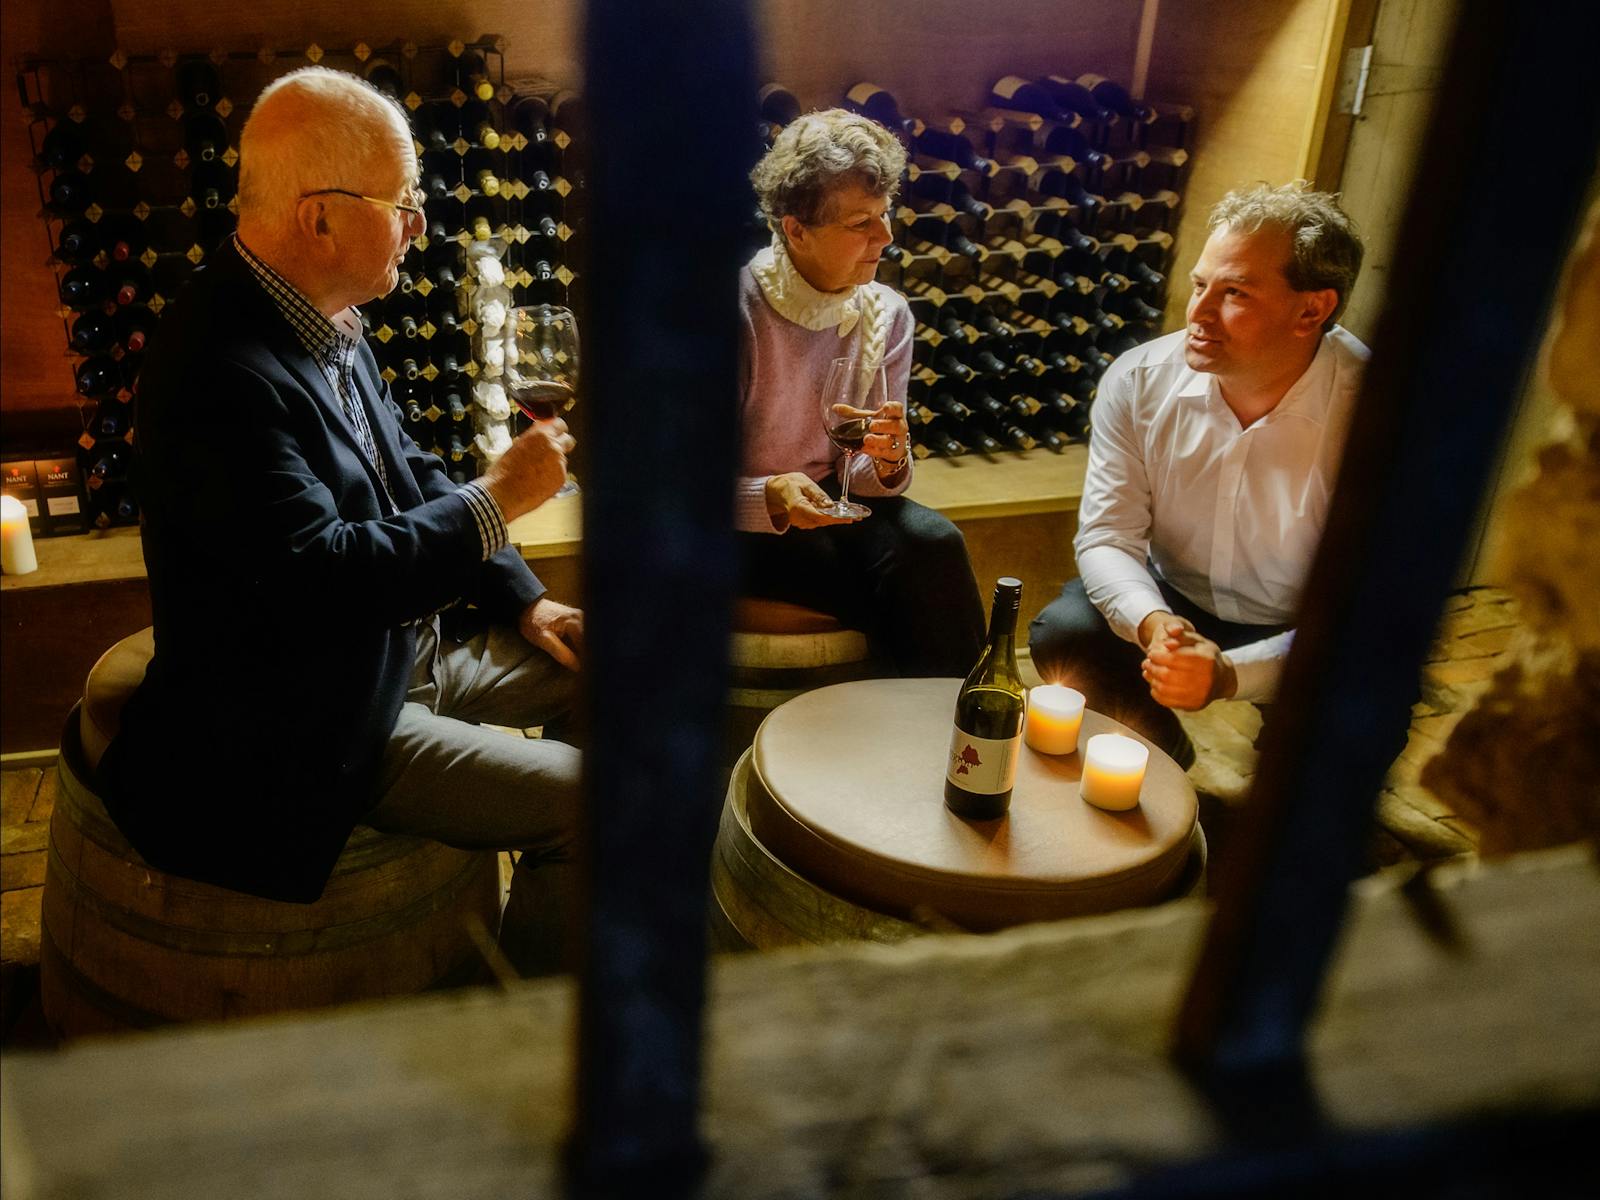 Experience wine tasting, featuring Tasmanian, in the old convict cellar at Woodbridge on the Derwent